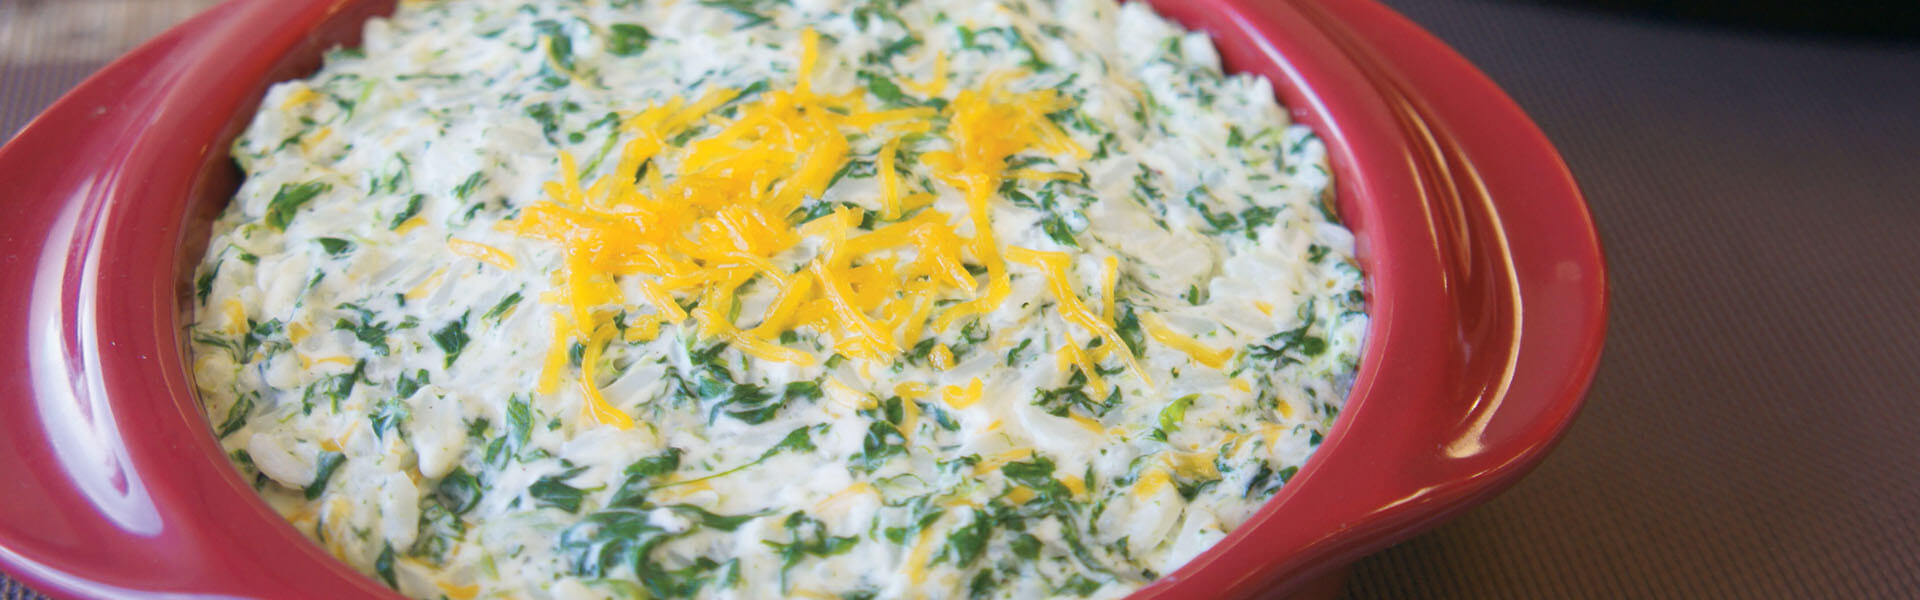 Creamy Spinach and Rice Dip